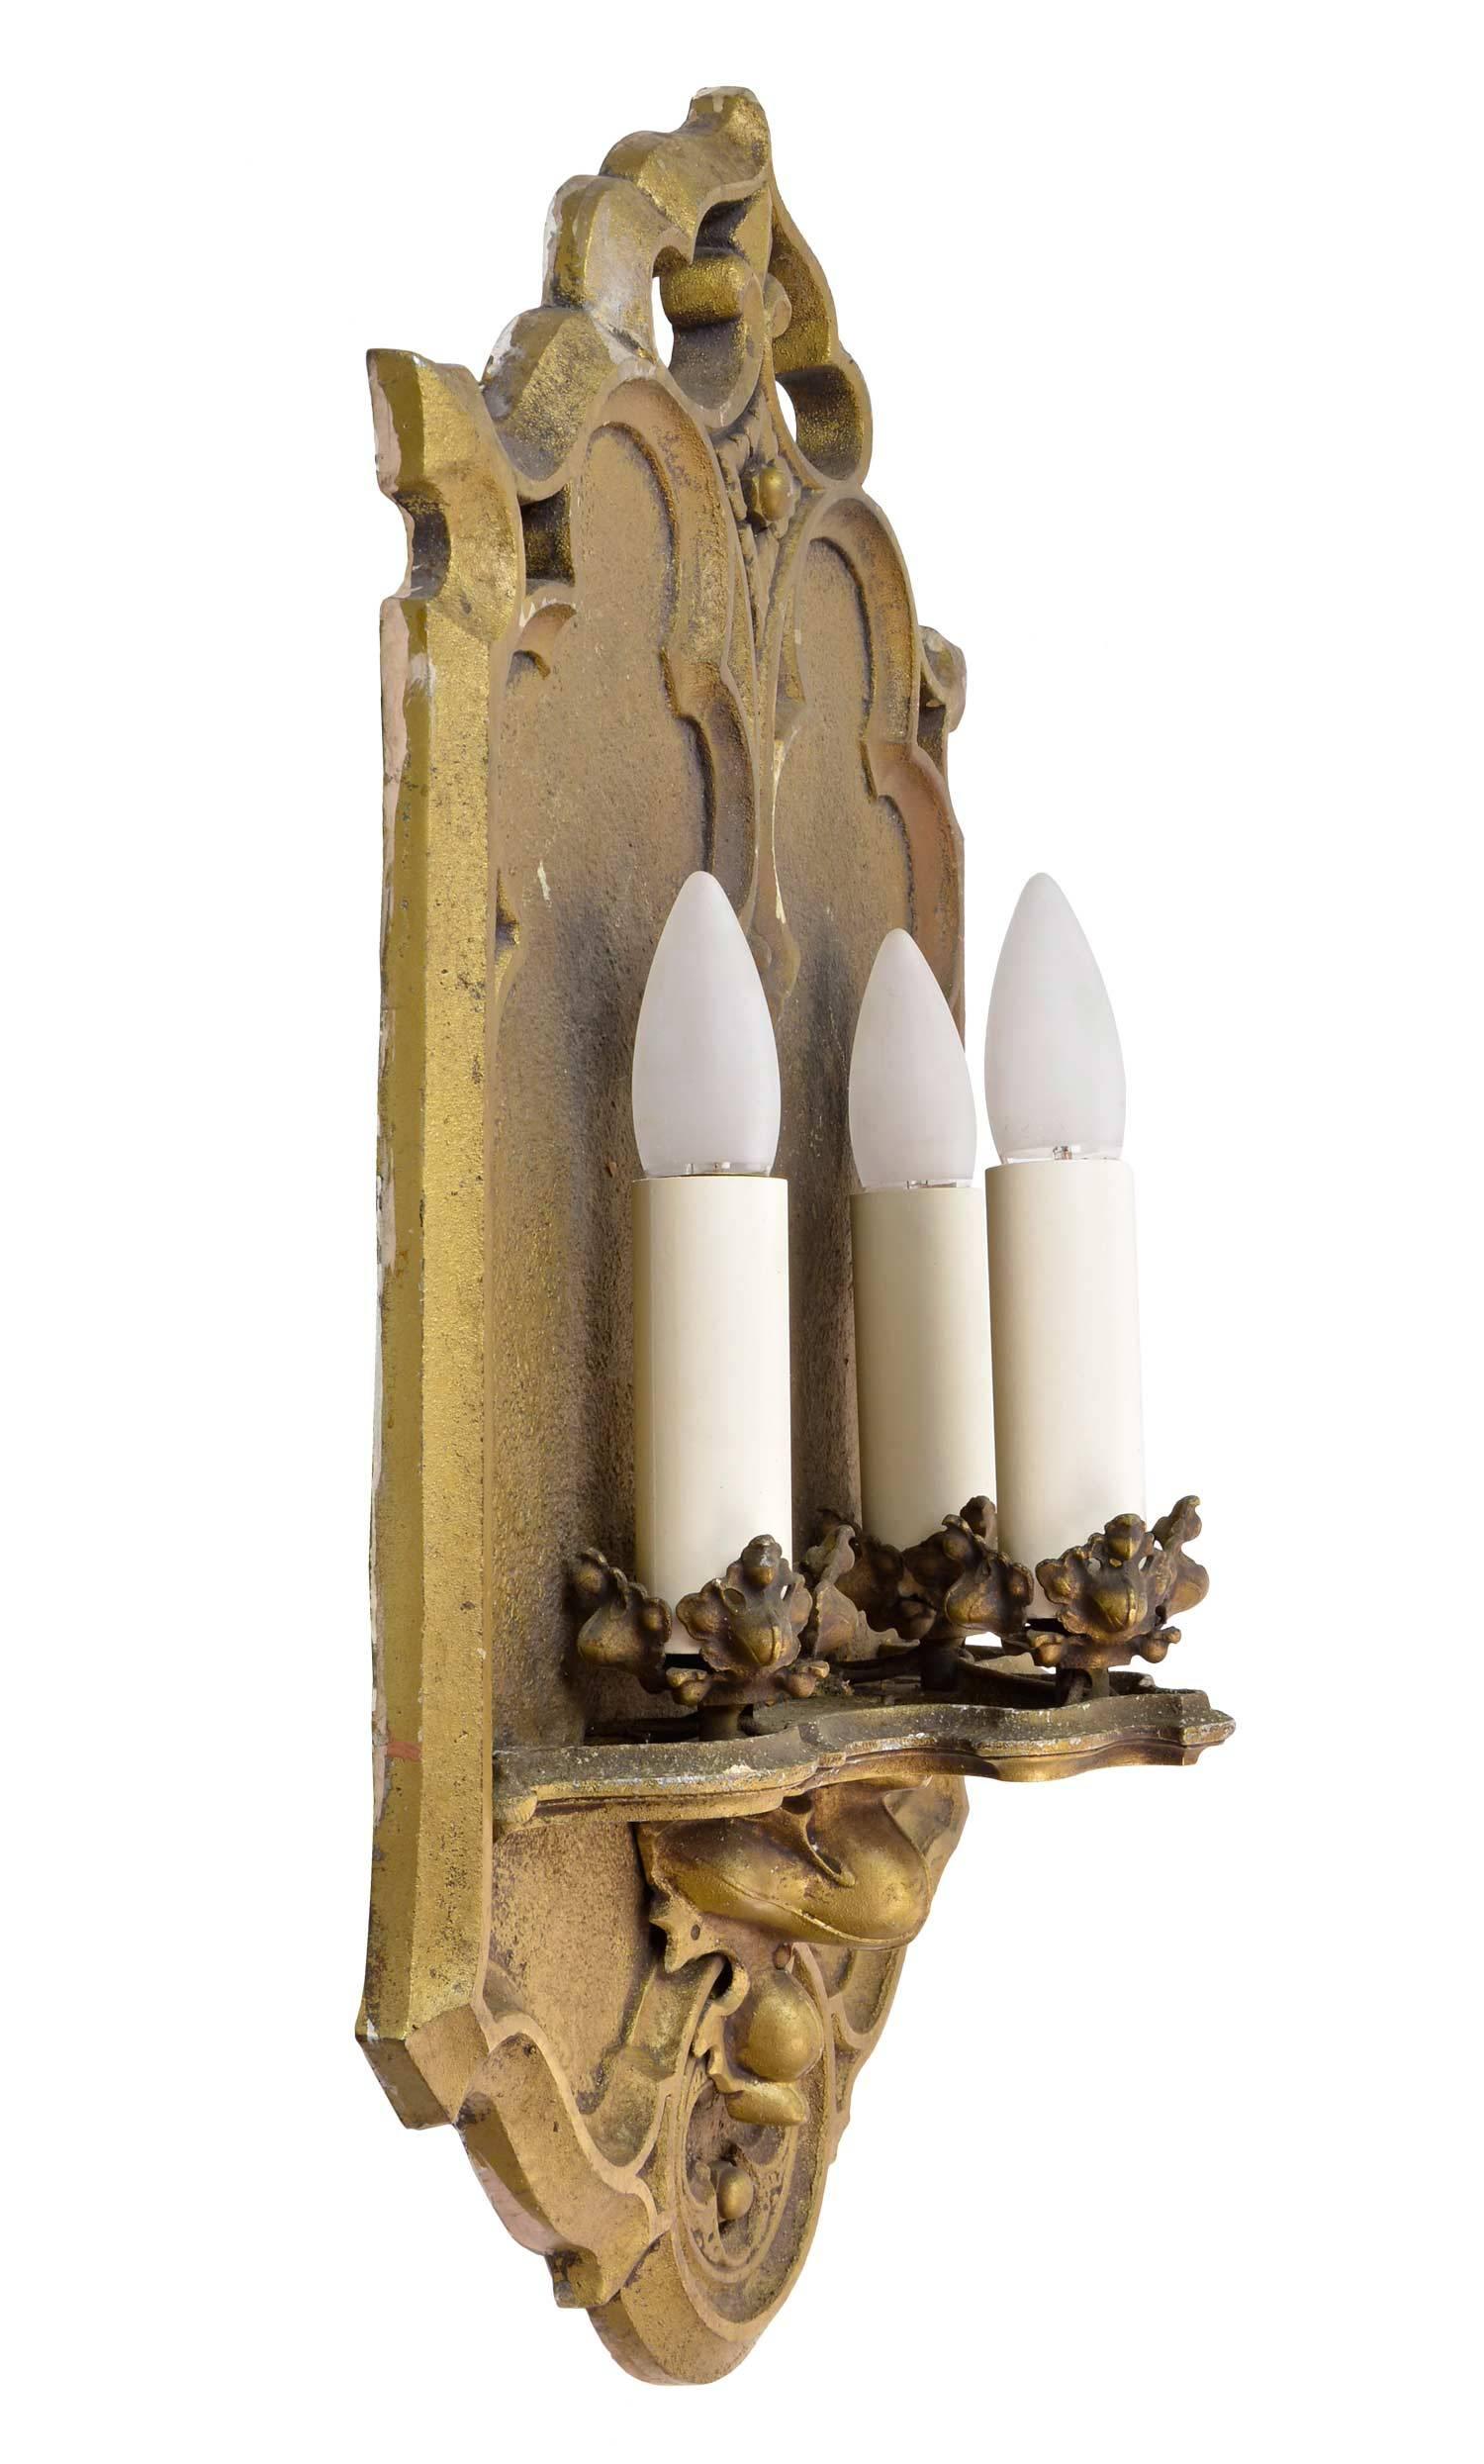 Gothic three candle sconce in cast aluminum and painted antique brass (original finish.) This sconce features all the standard Gothic motifs; quatrefoils, trifold and crockets. Made around 1935, they are still in beautiful condition. Matching